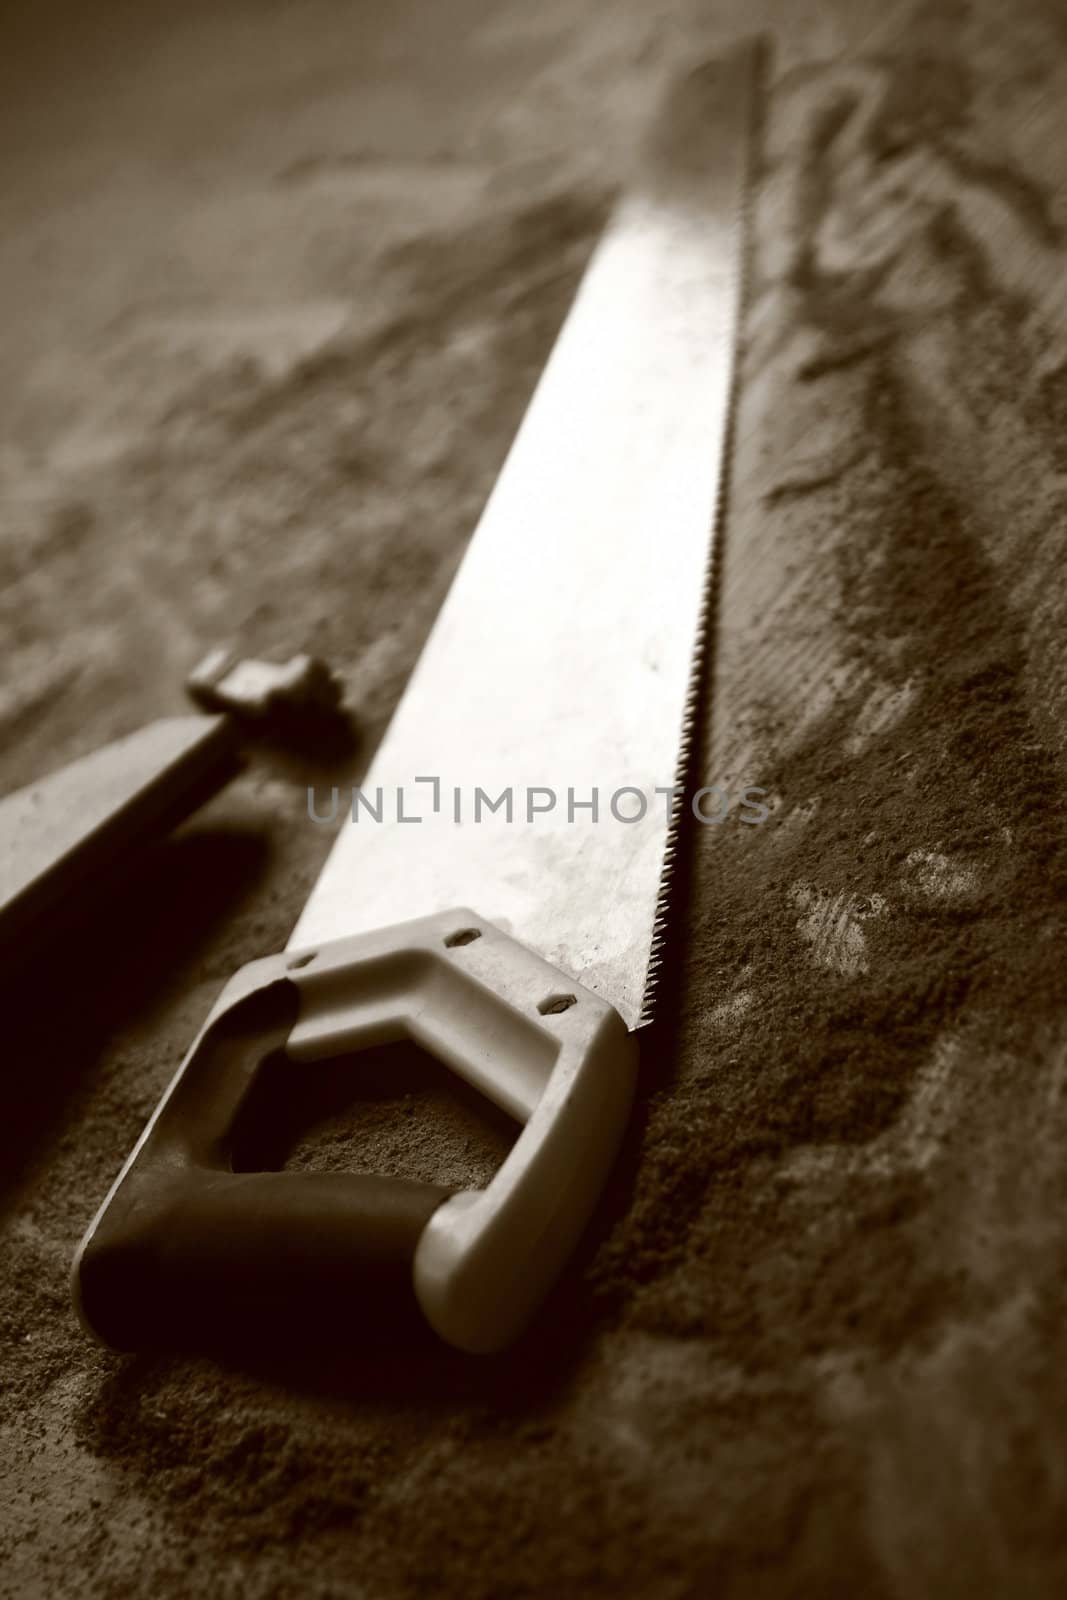 black & white photo of saw lying on floor surrounded by sawdust